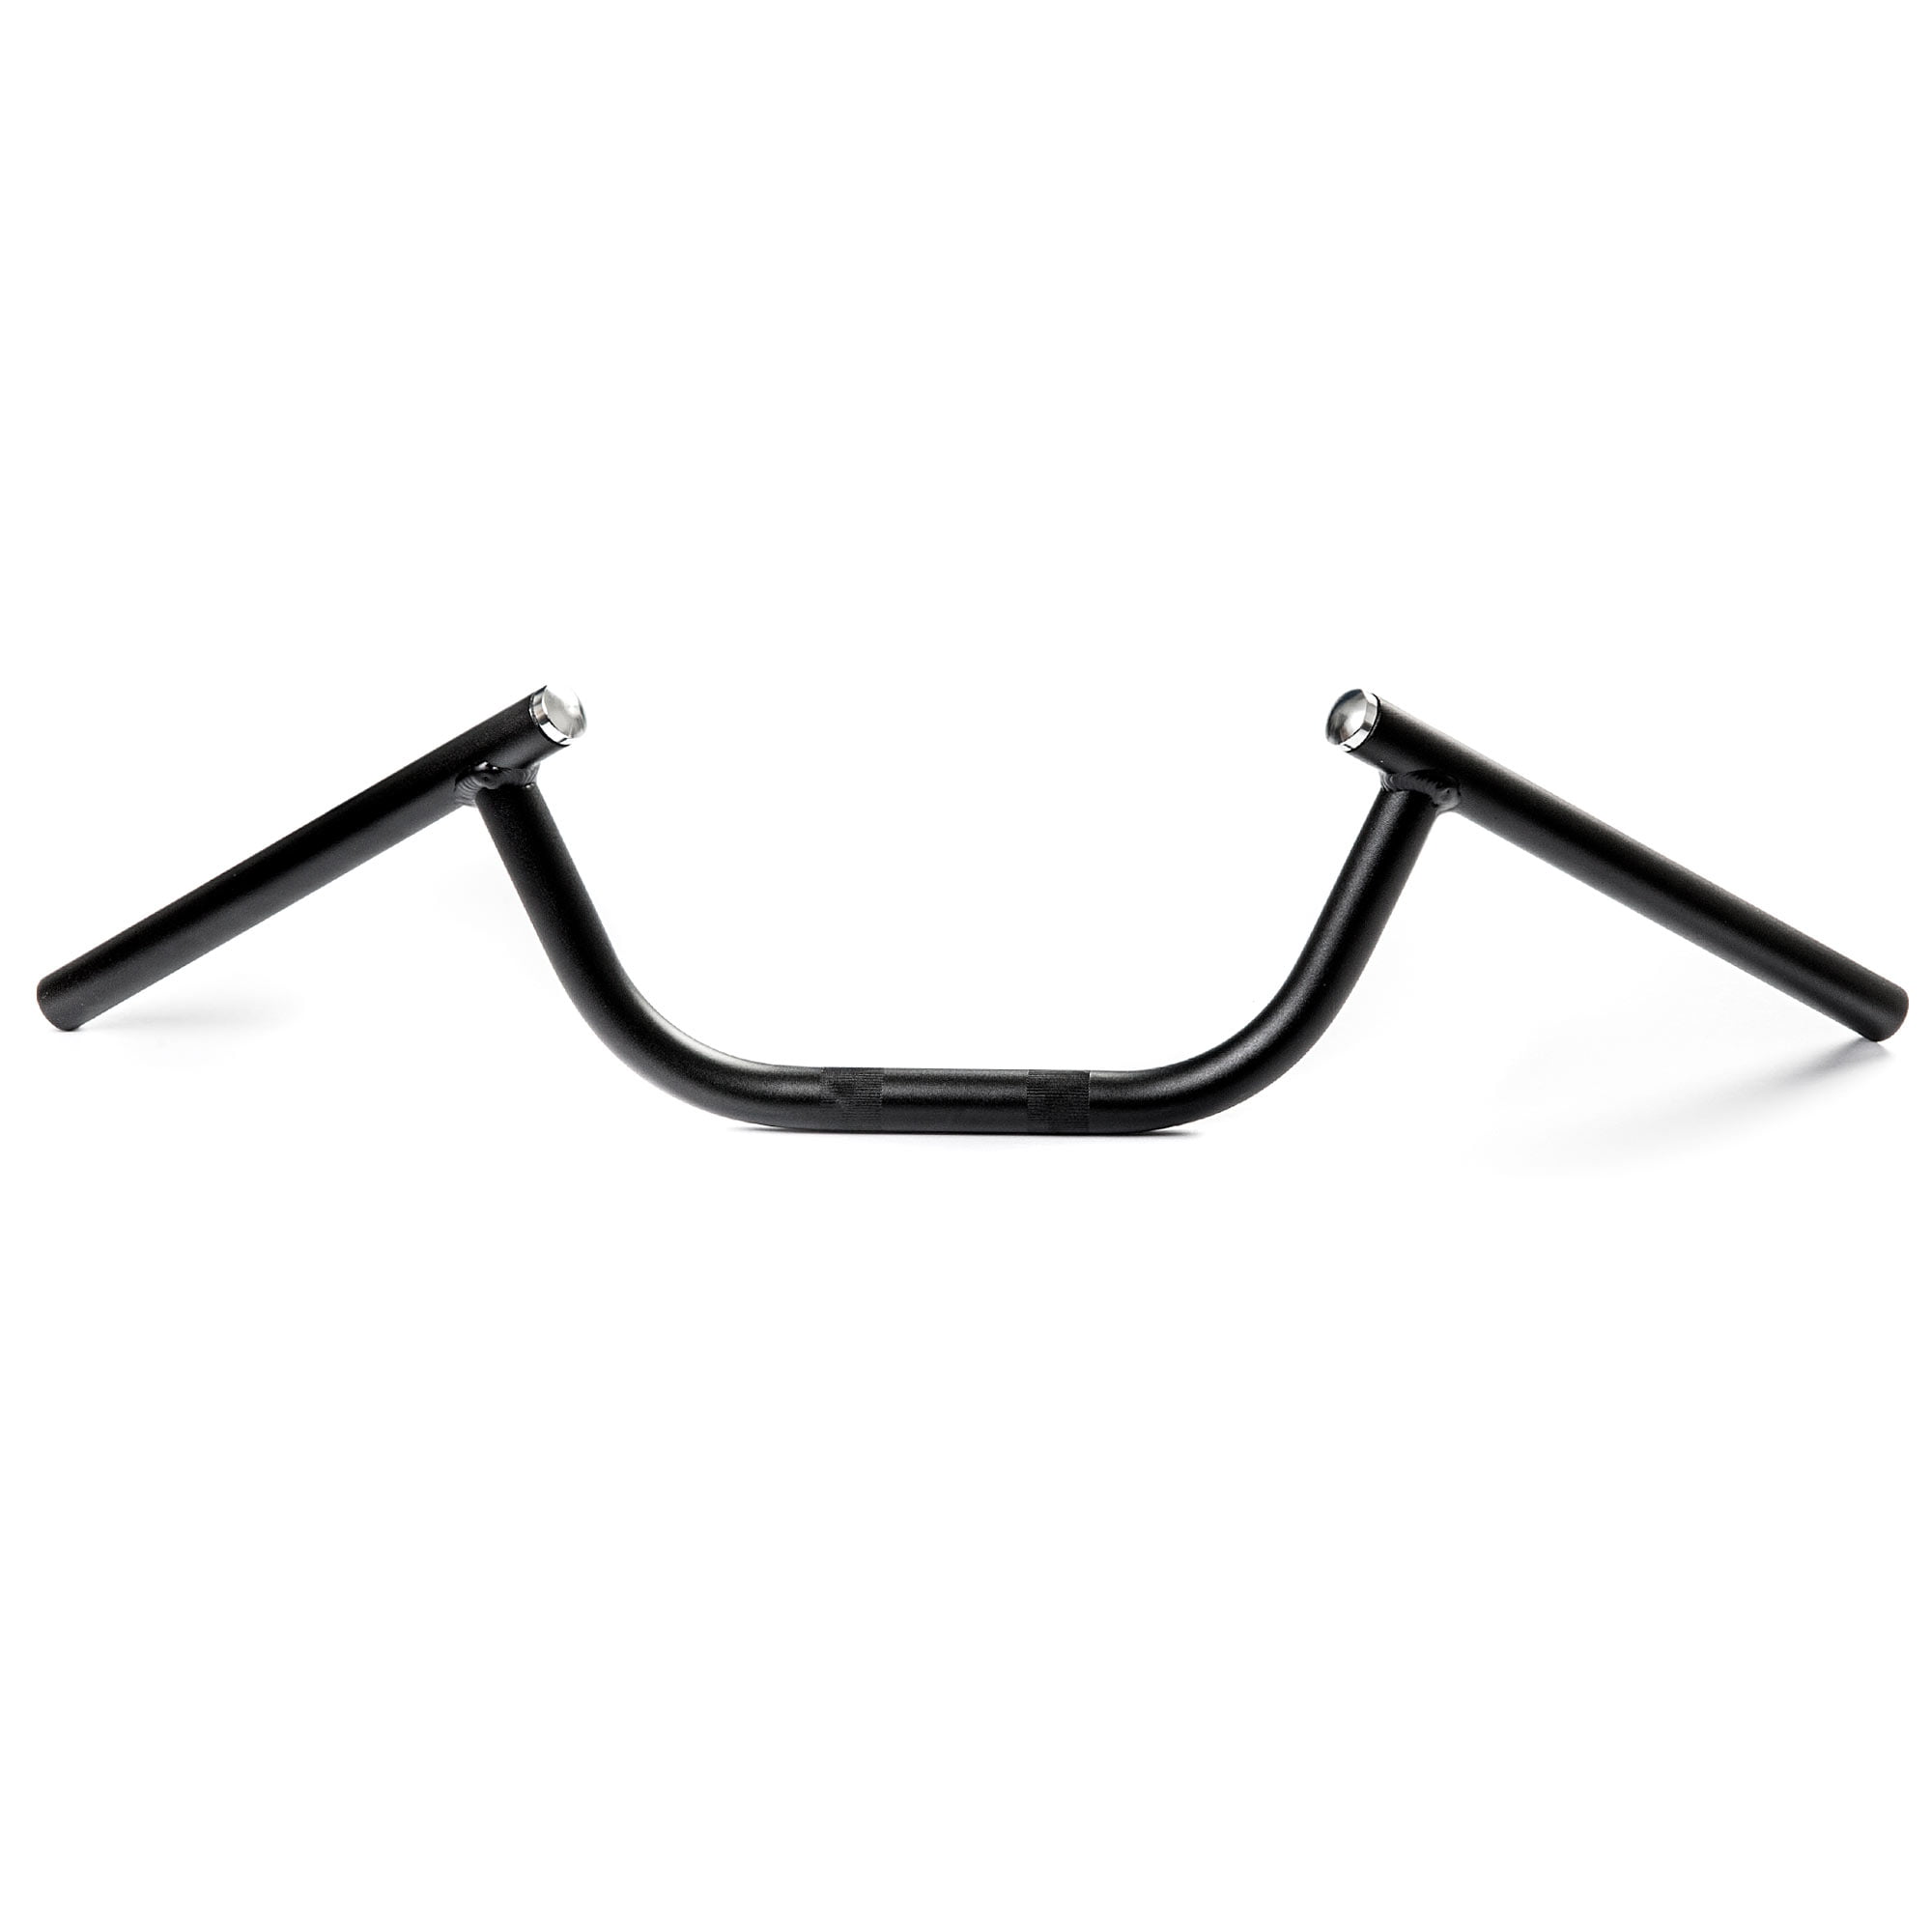 Krator Motorcycle Handlebar 7//8 Black Cafe Racer Clubman Compatible with Buell Ulysses XB12X RS RR 1000 1200